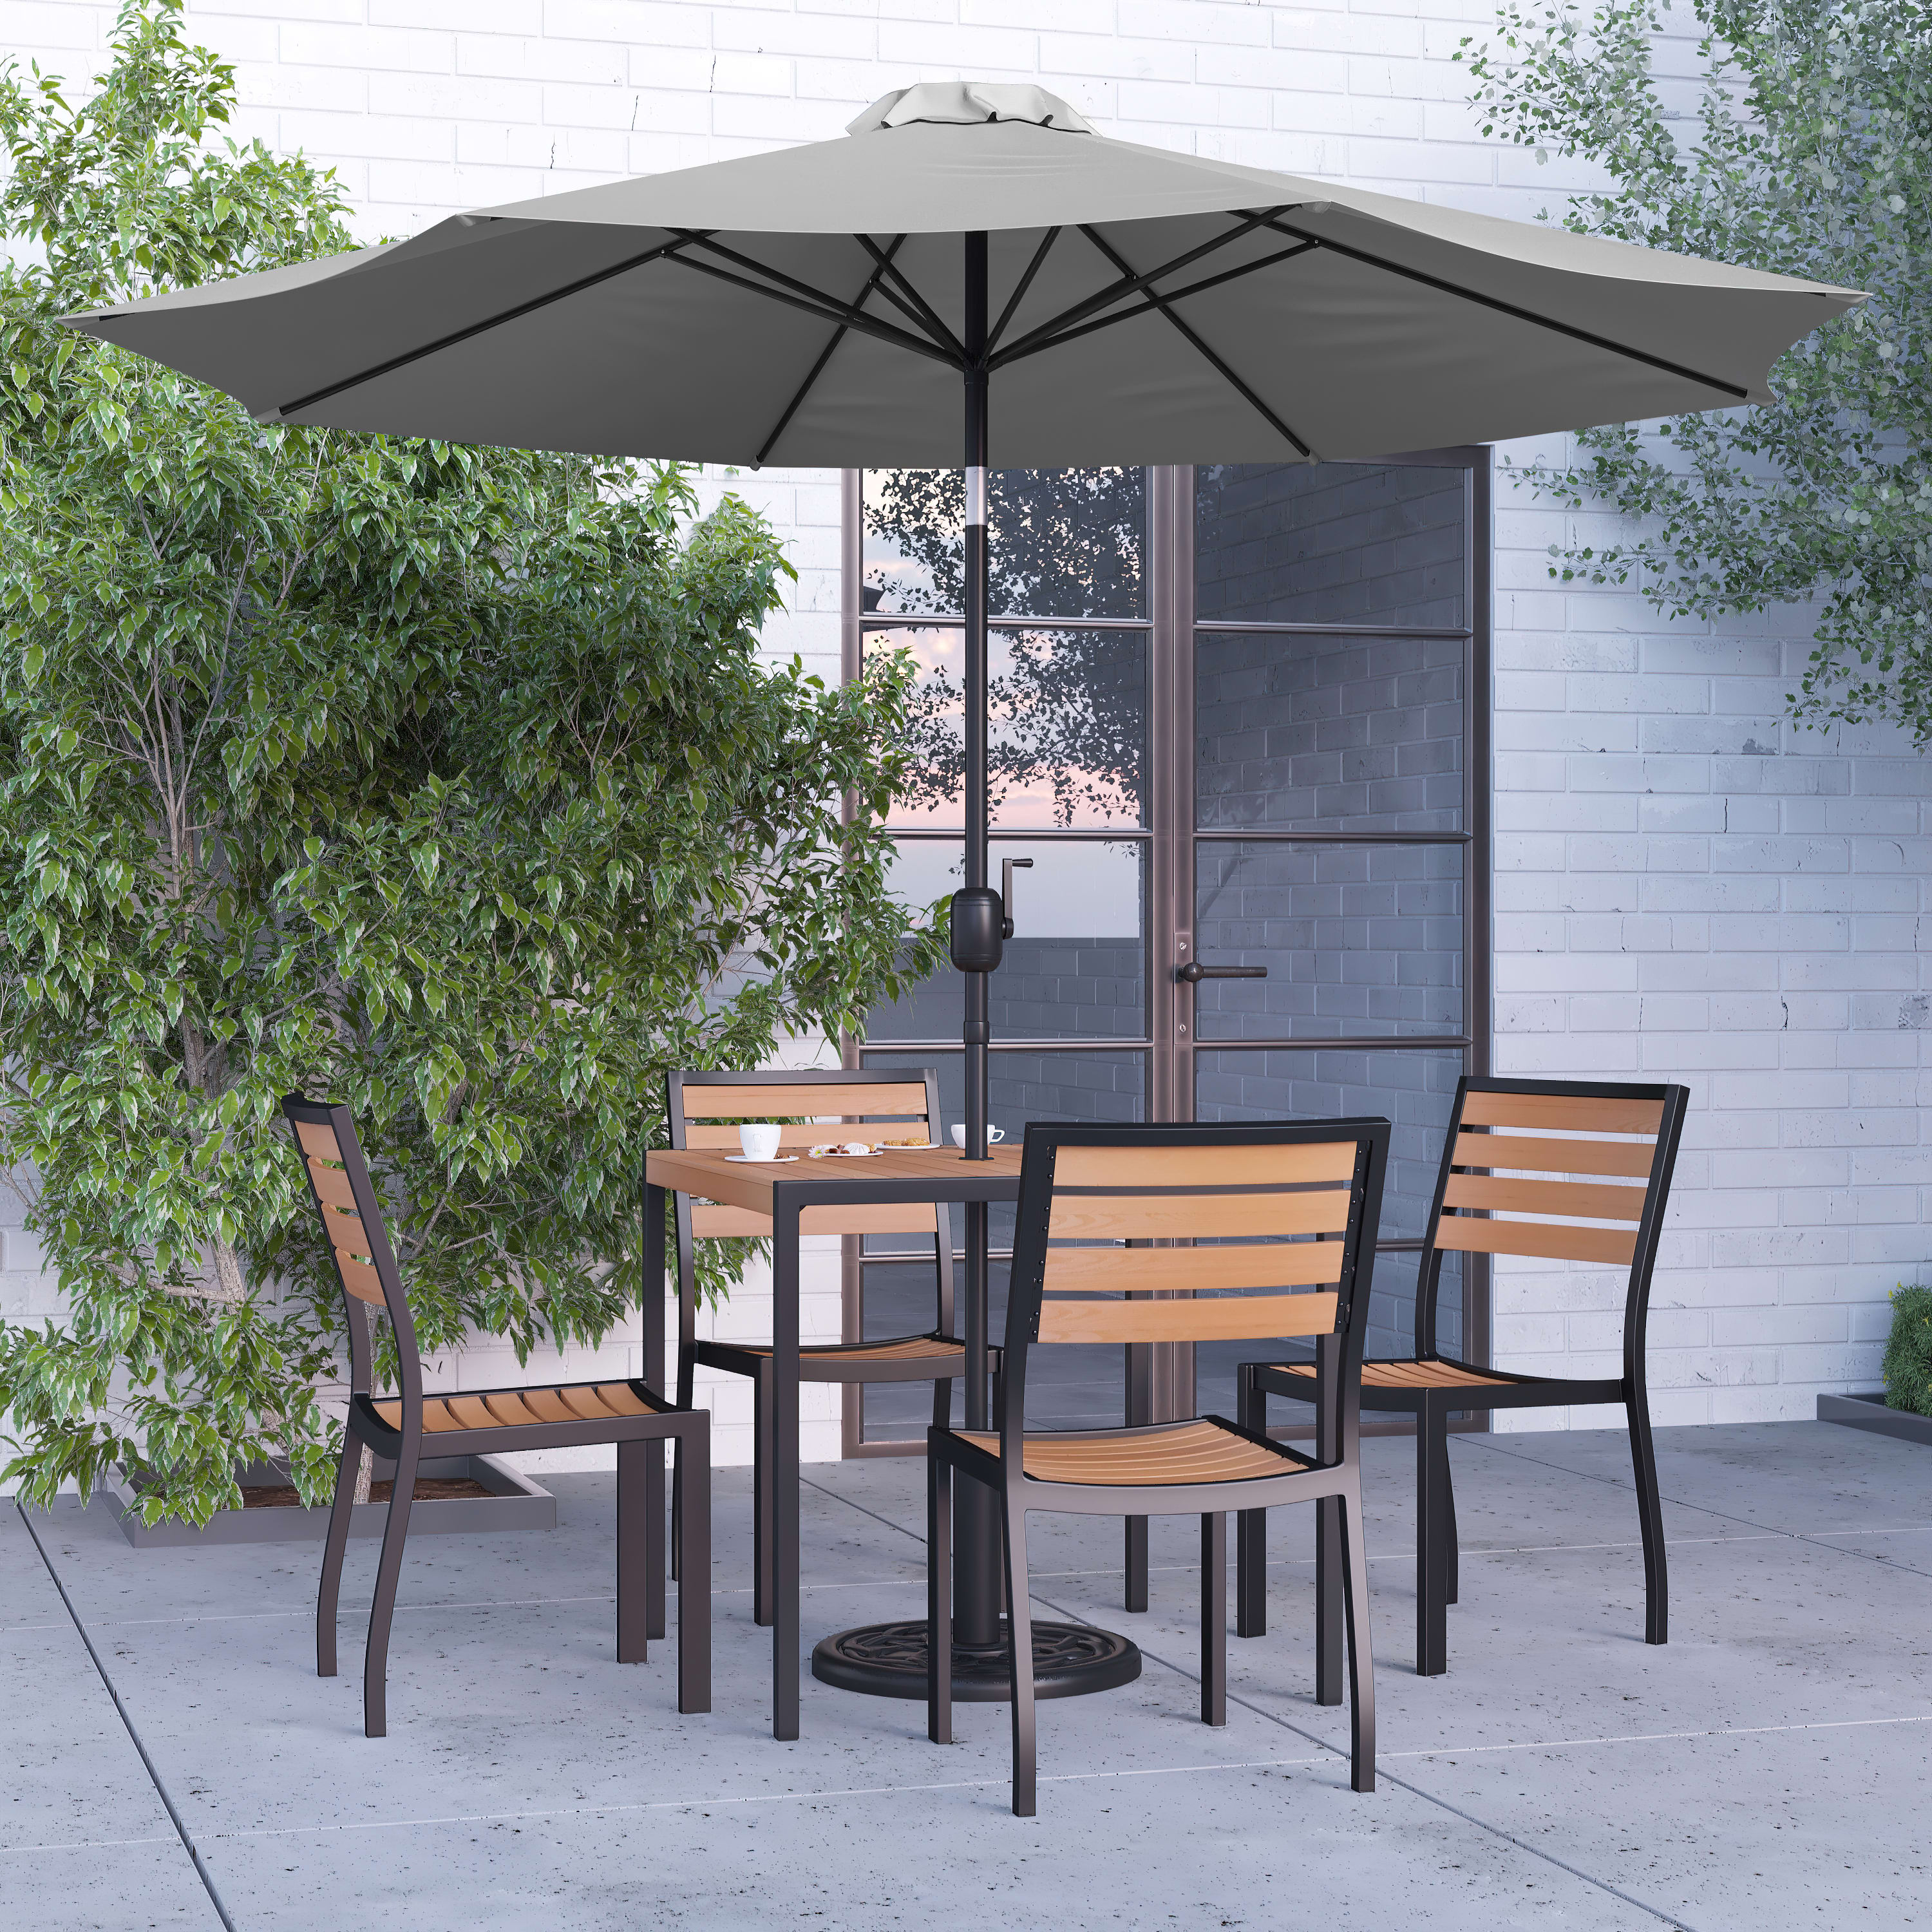 Merrick Lane Seven Piece Faux Teak Patio Dining Set - 35" Square Table, 4 Armless Stacking Club Chairs and 9' Gray Patio Umbrella & Base - image 1 of 18